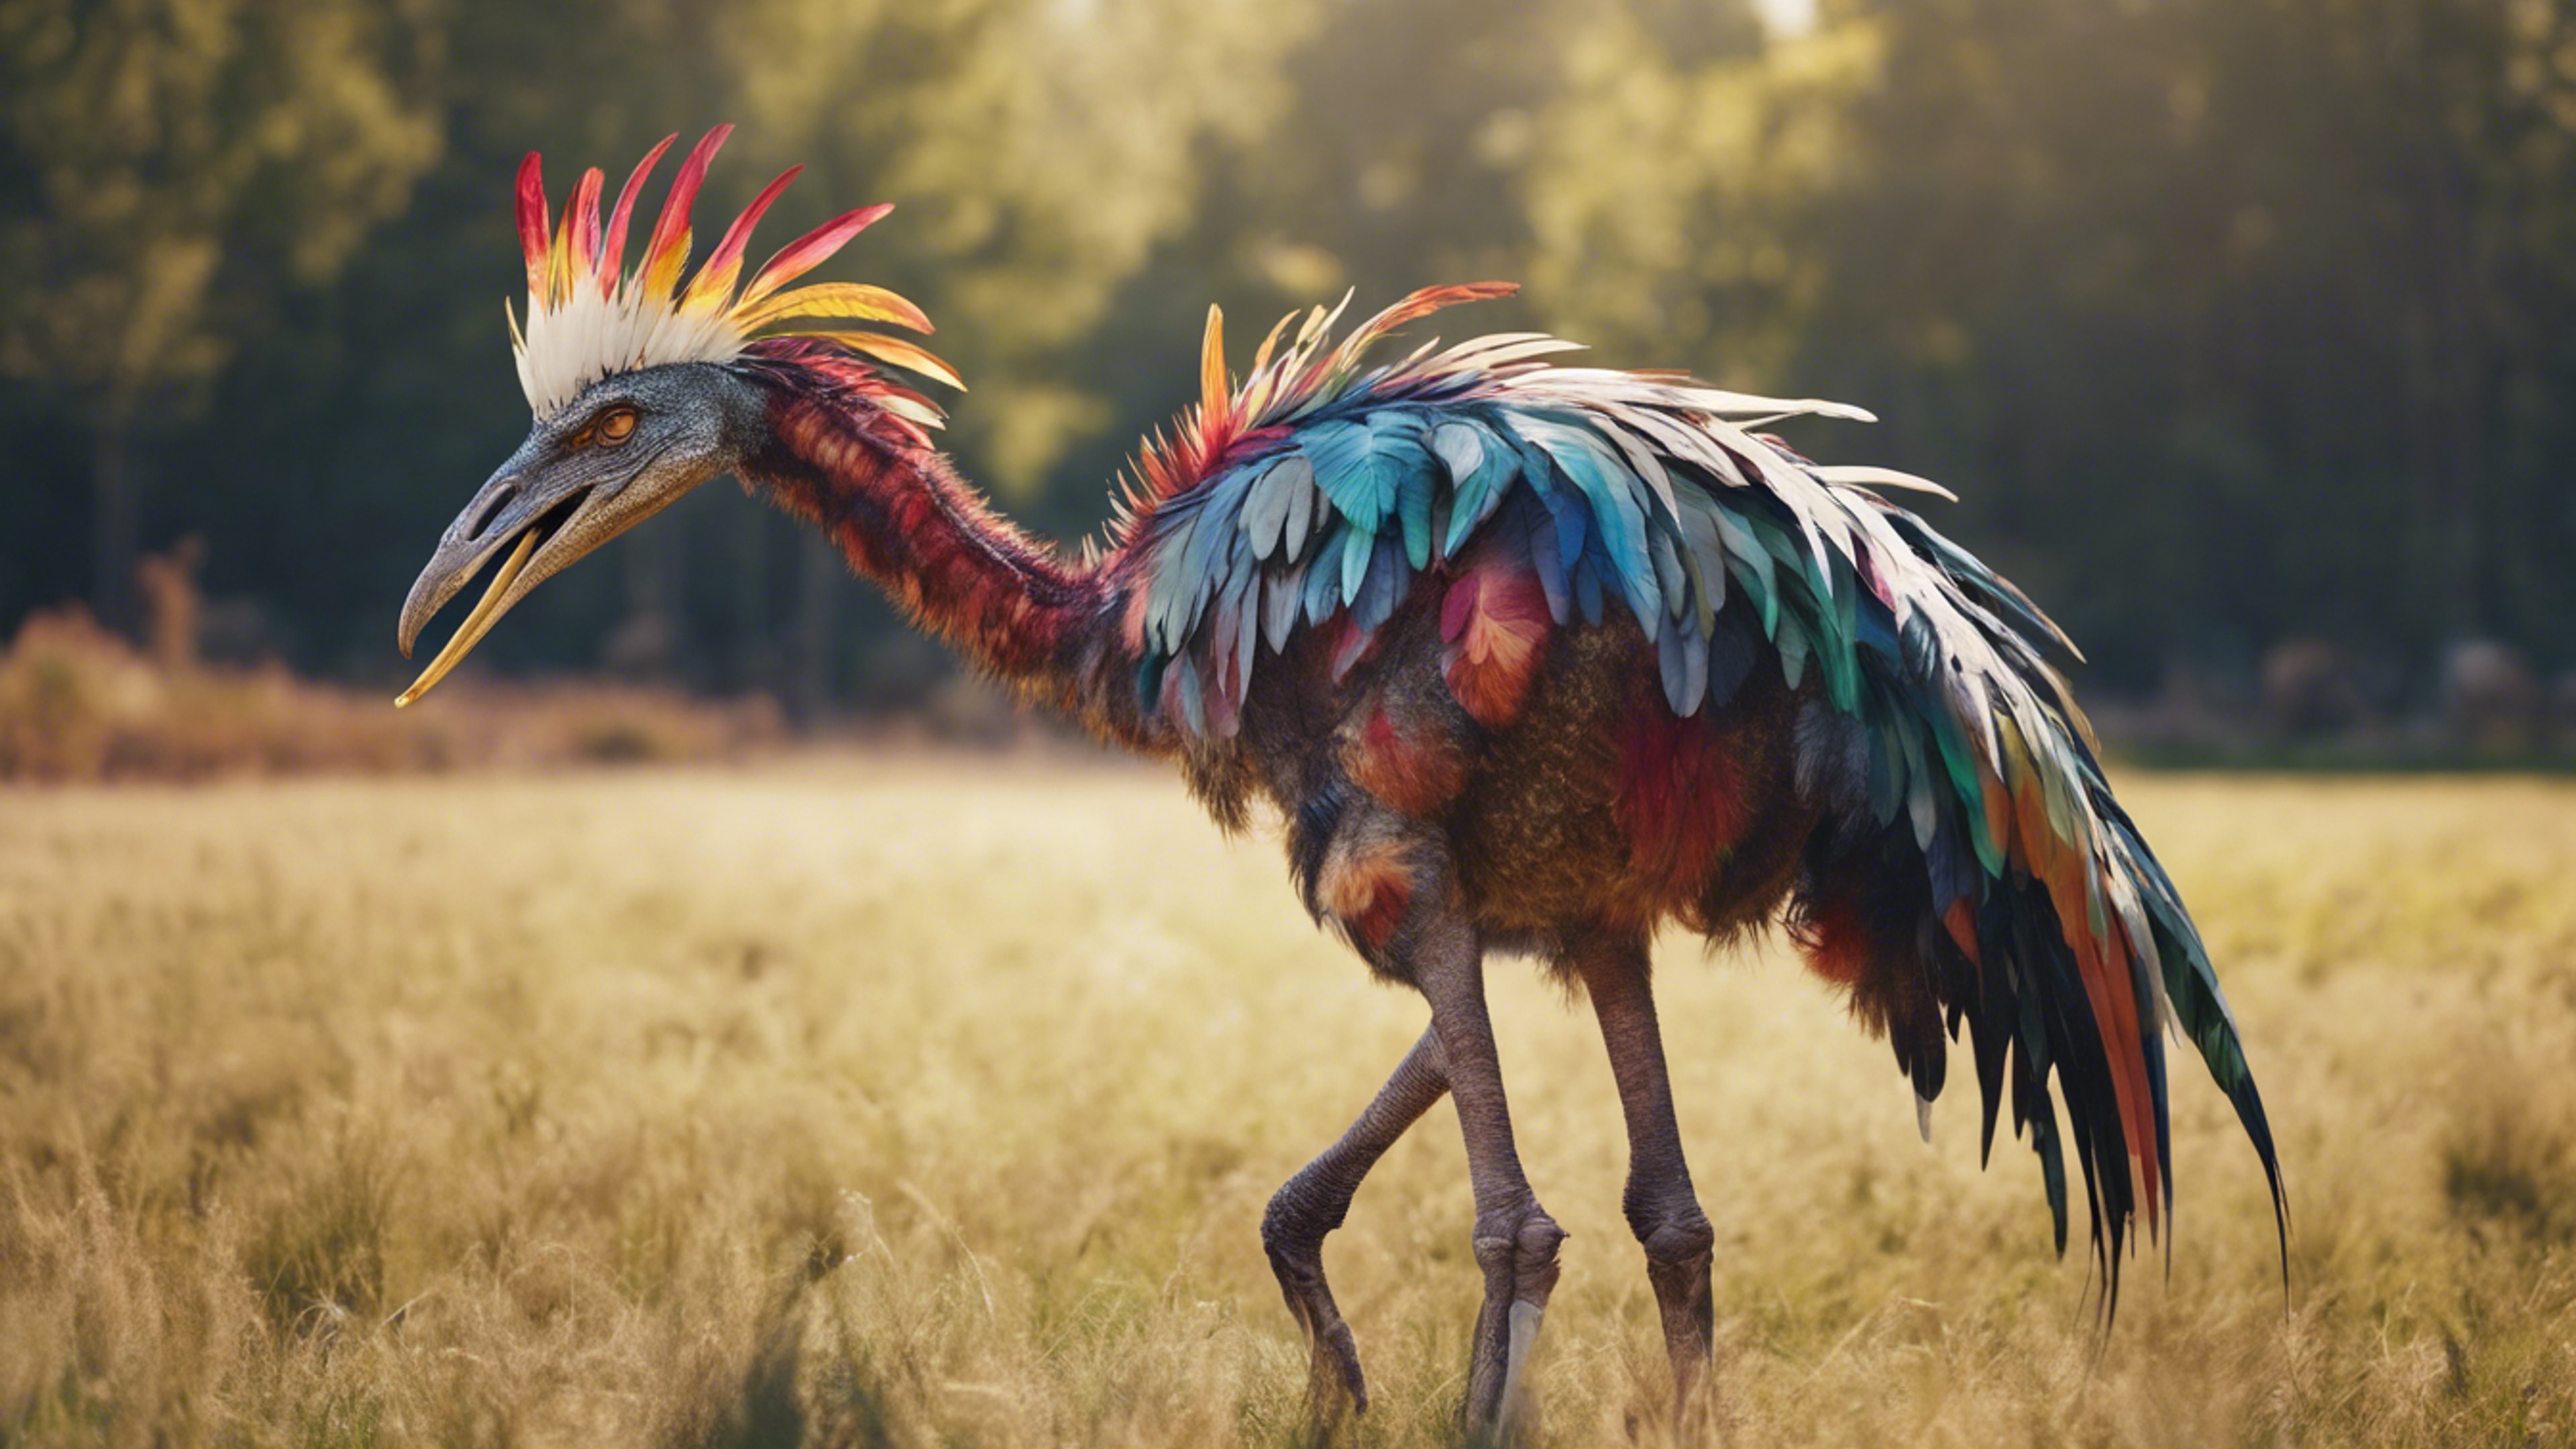 A Struthiomimus with colorful feathers prancing around in an open meadow. Tapéta[bbeb240df8e5485aba58]